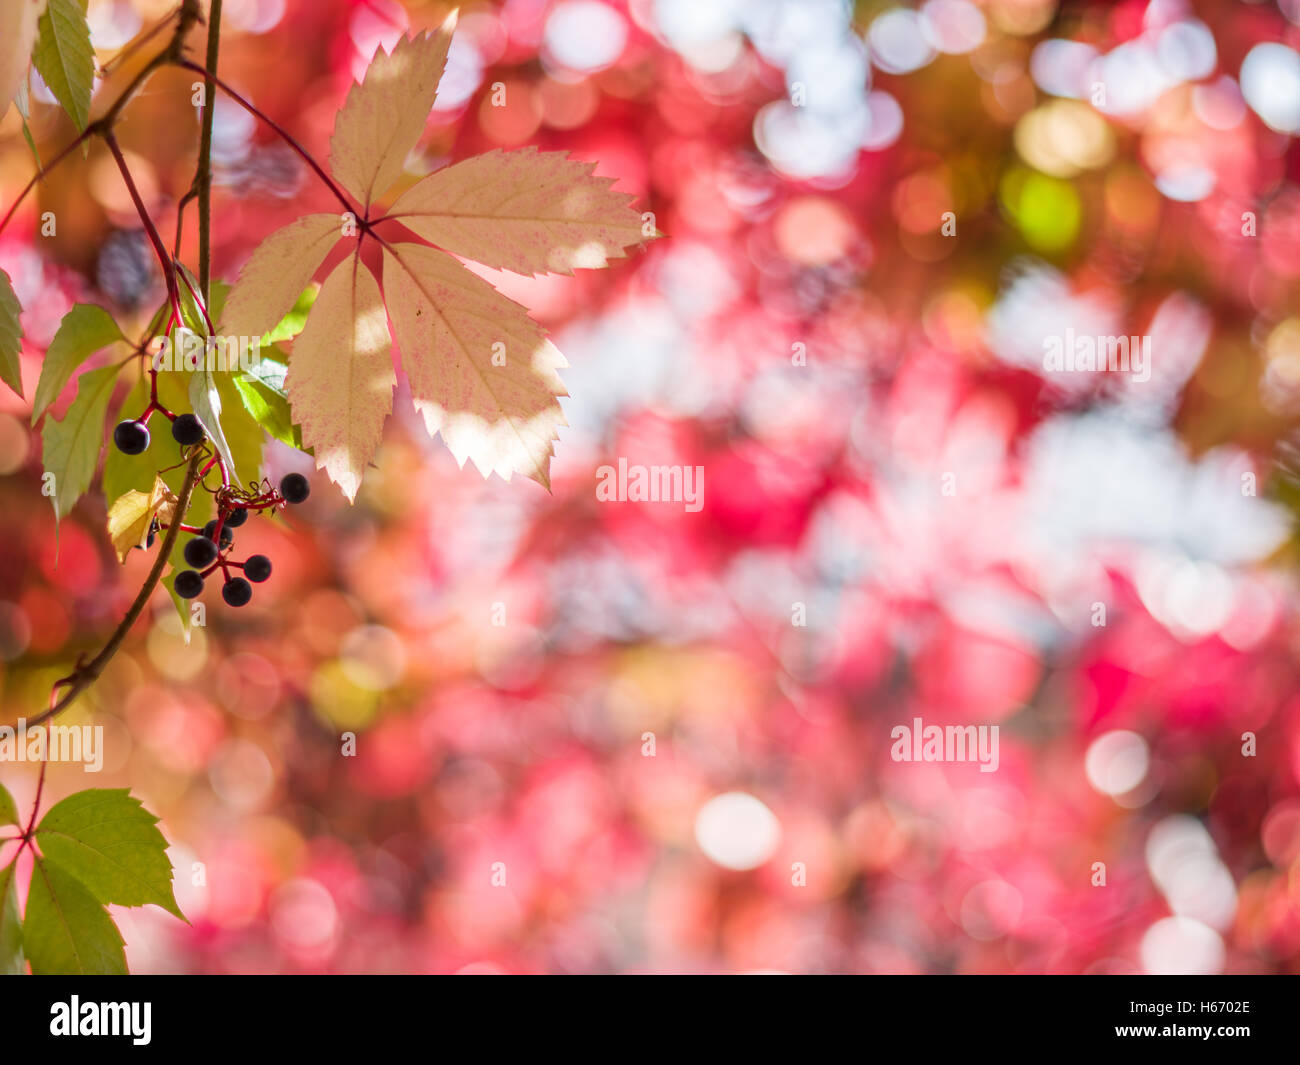 Blurred red leaves. Nature background Stock Photo - Alamy